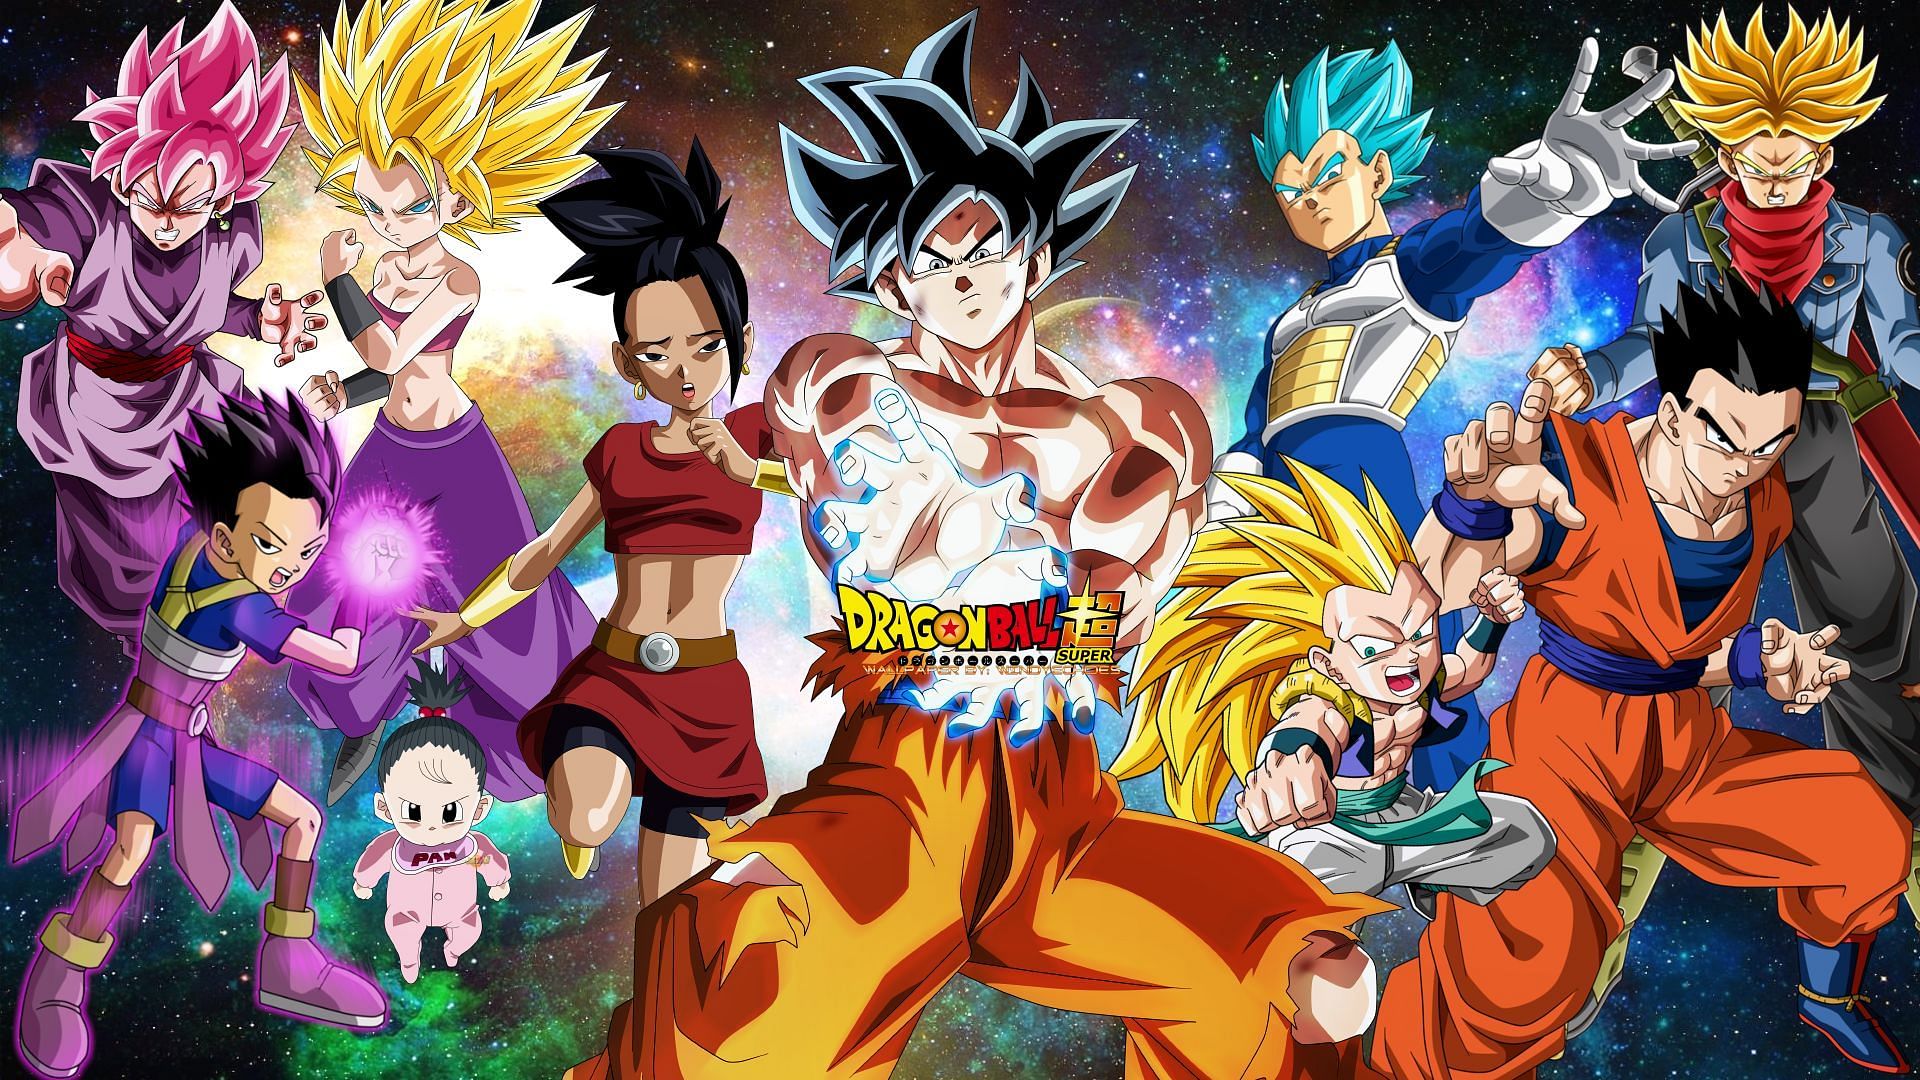 The 10 Strongest Saiyans in Dragon Ball History